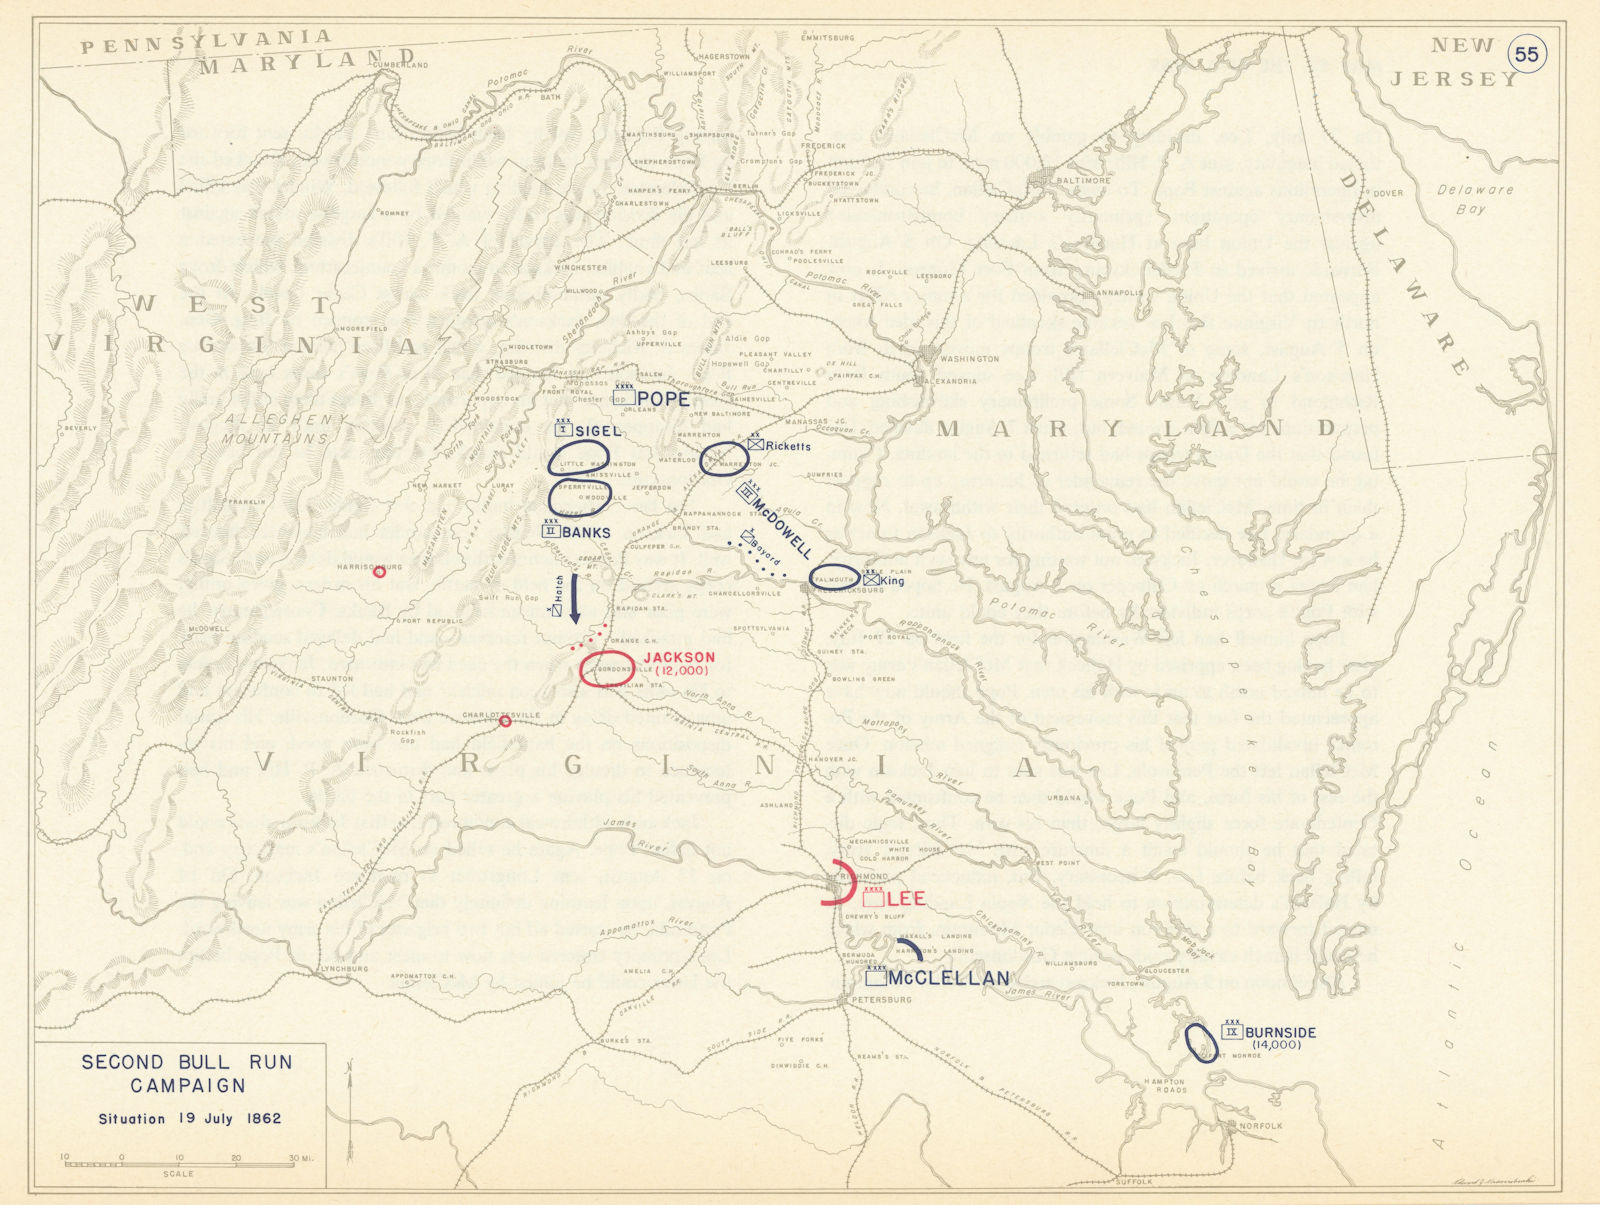 American Civil War. Situation 19 July 1862. Second Bull Run Campaign 1959 map